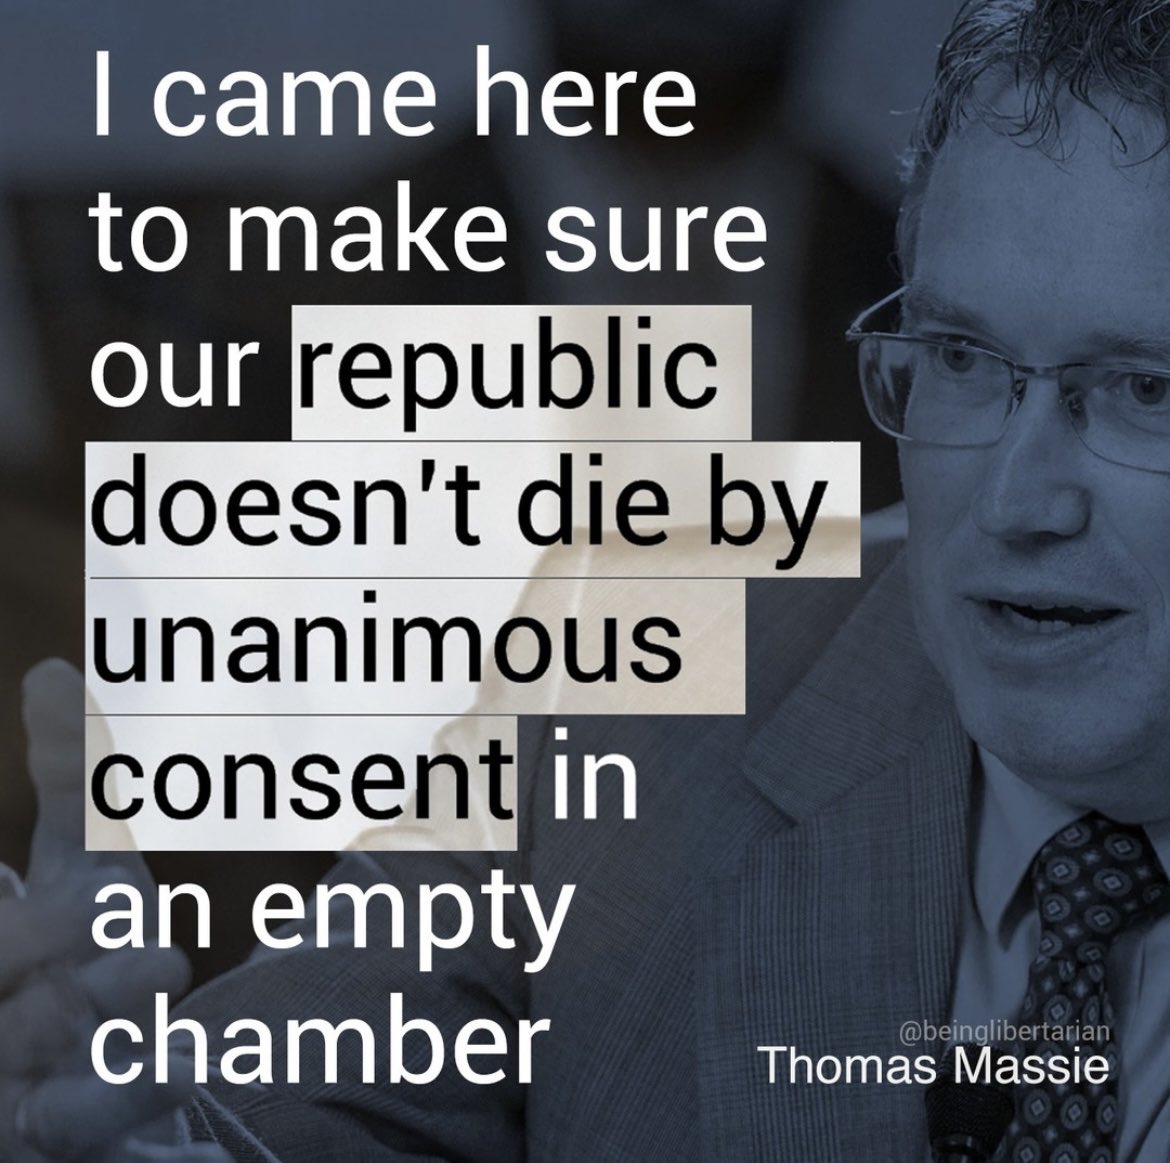 Massie doesn’t mind being the most hated man in DC to do the right thing.